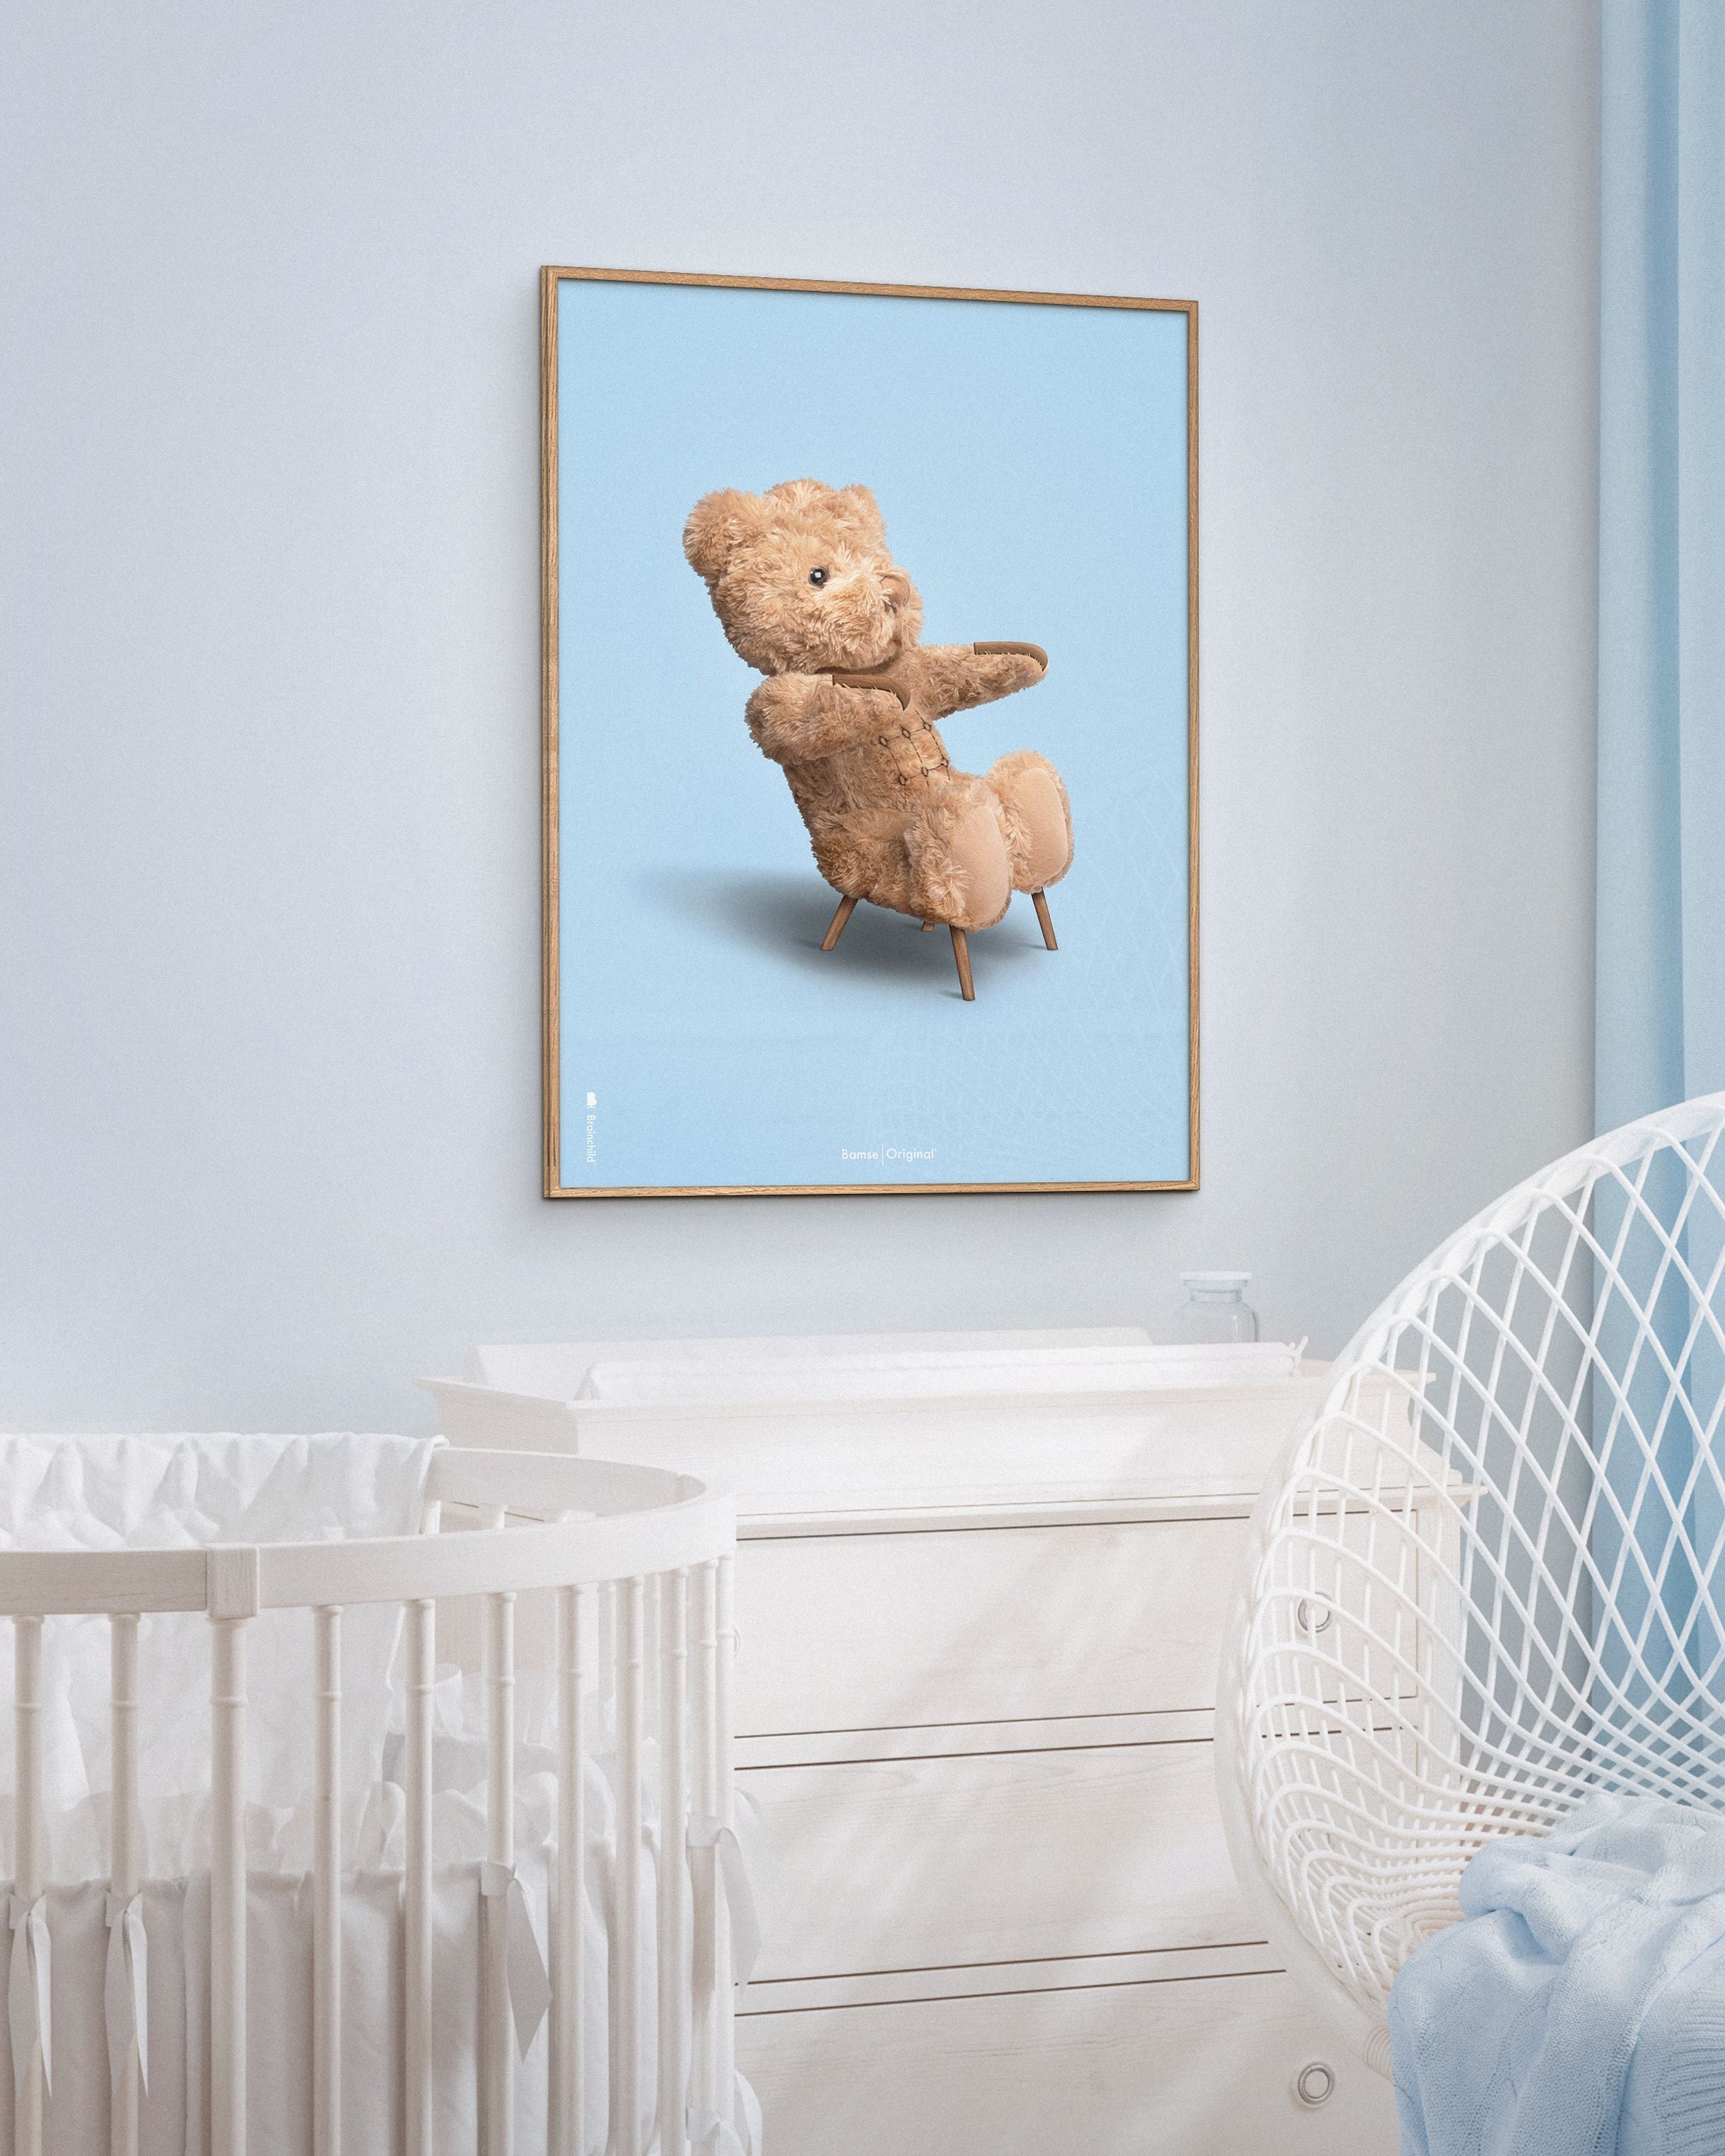 Brainchild Teddy Bear Classic Poster Without Frame 70x100 Cm, Light Blue Background